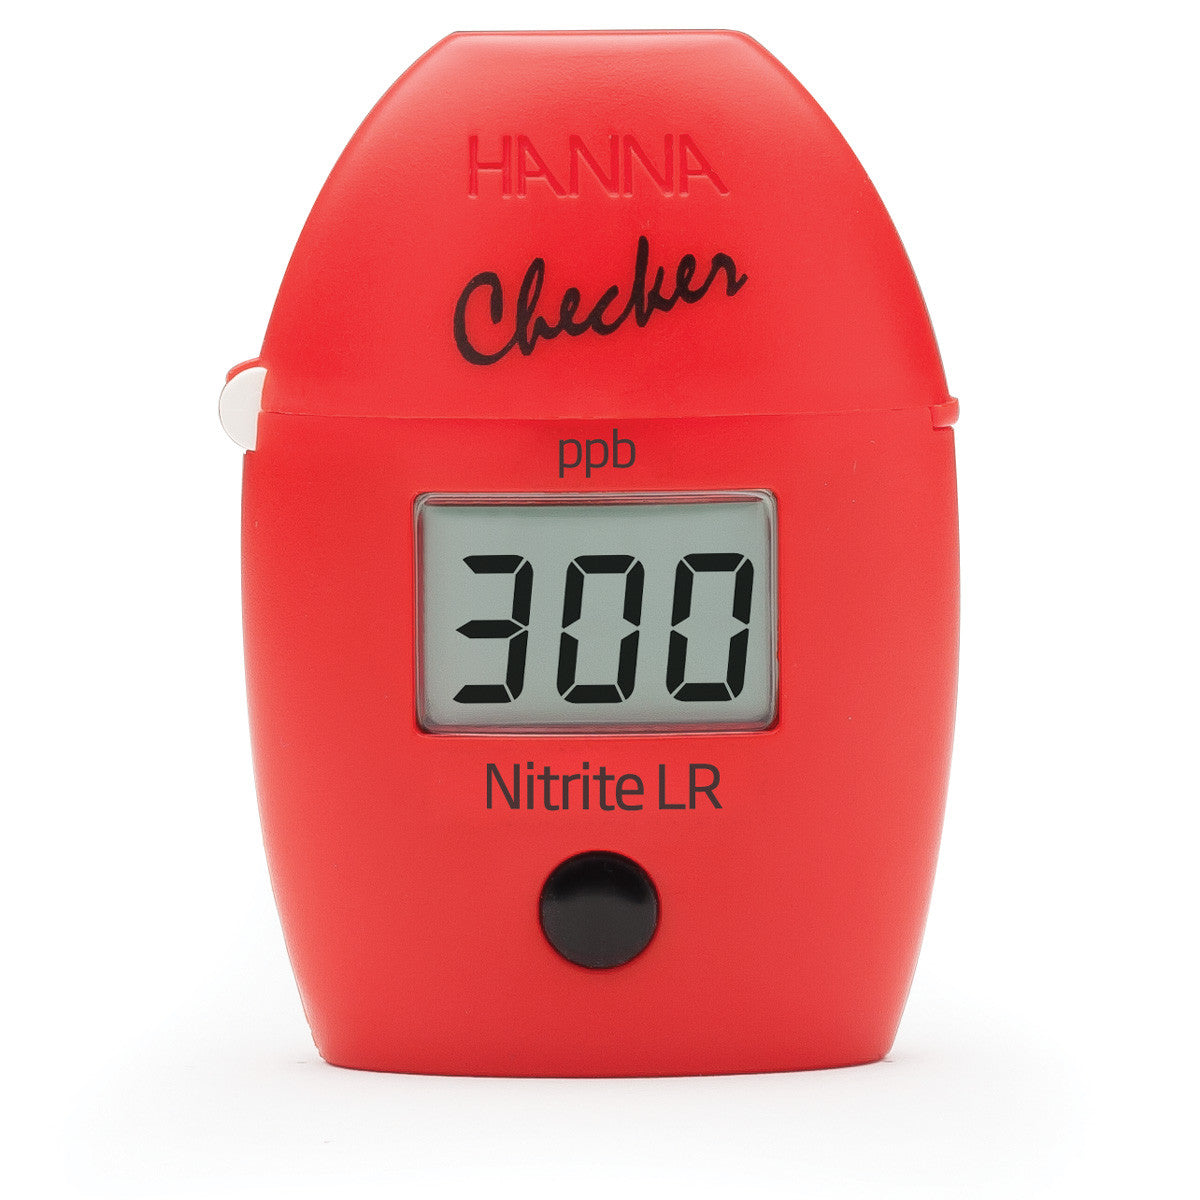 A red TAS digital timer with the word "Low Range Nitrite Checker HC" prominently displayed.